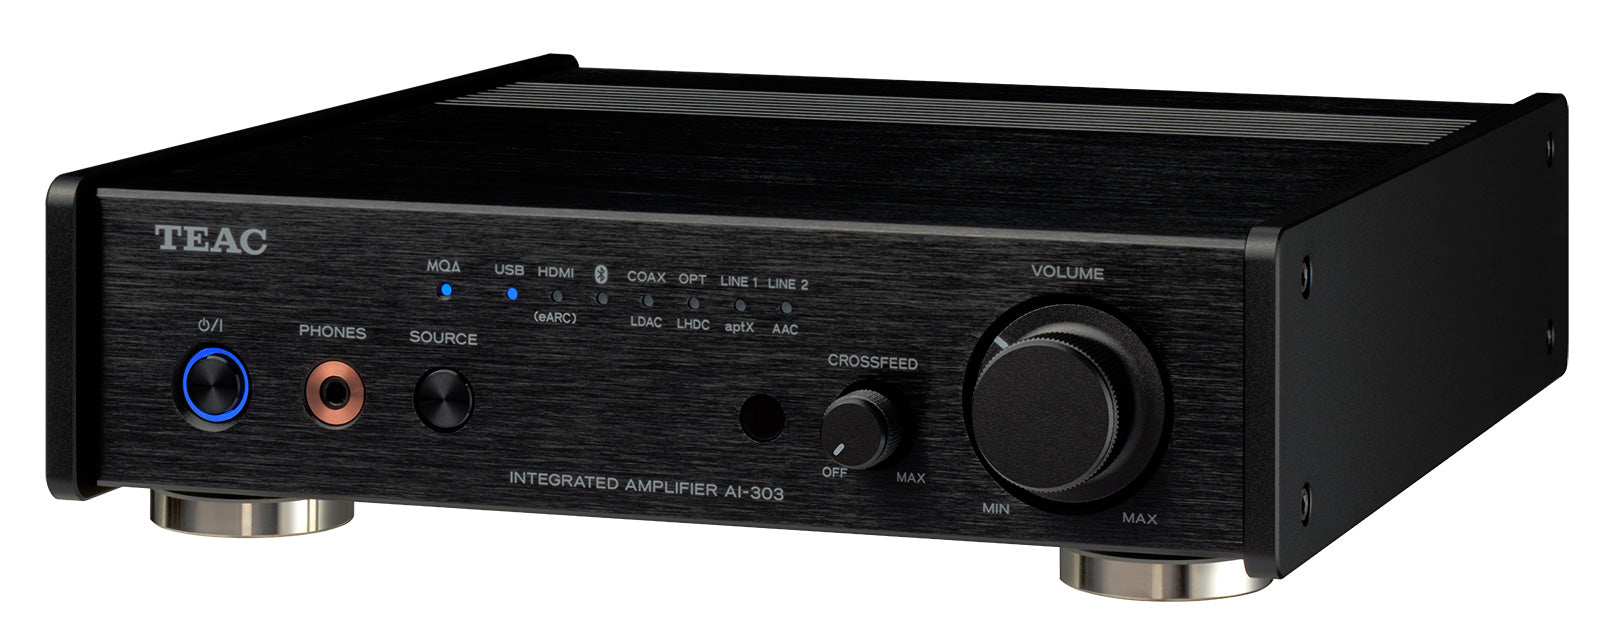 AI-303 USB DAC Integrated Amplifier Black and Sound HQ